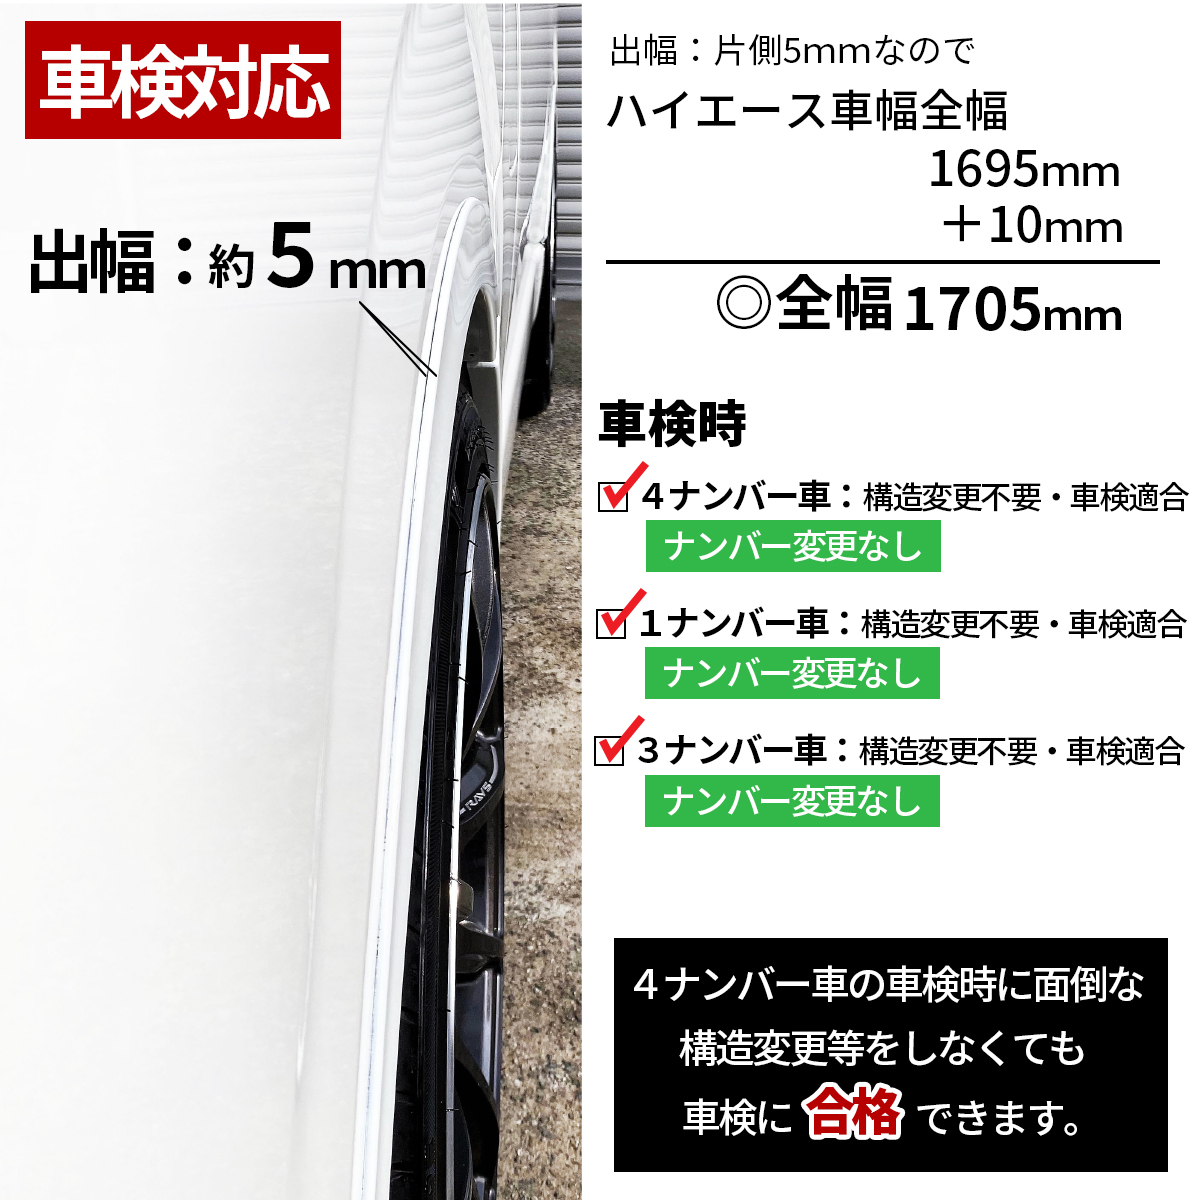  Hiace over fender vehicle inspection correspondence painting goods structure modification un- necessary stylish fender 200 series all model standard wide body car correspondence original color 070 209 1G3 1E7